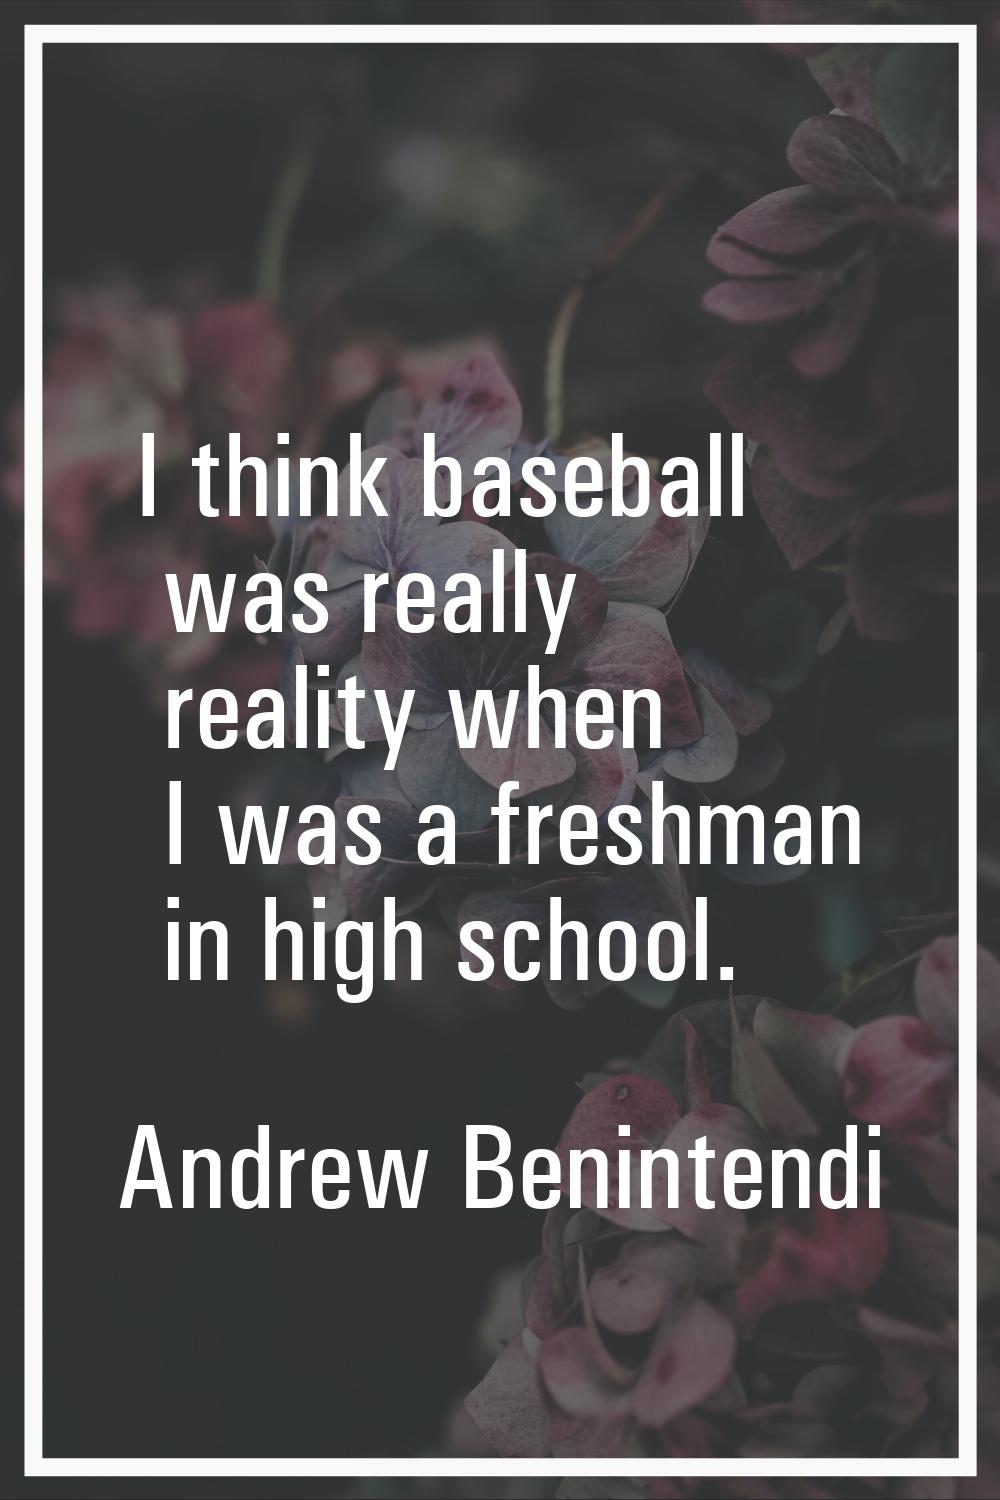 I think baseball was really reality when I was a freshman in high school.